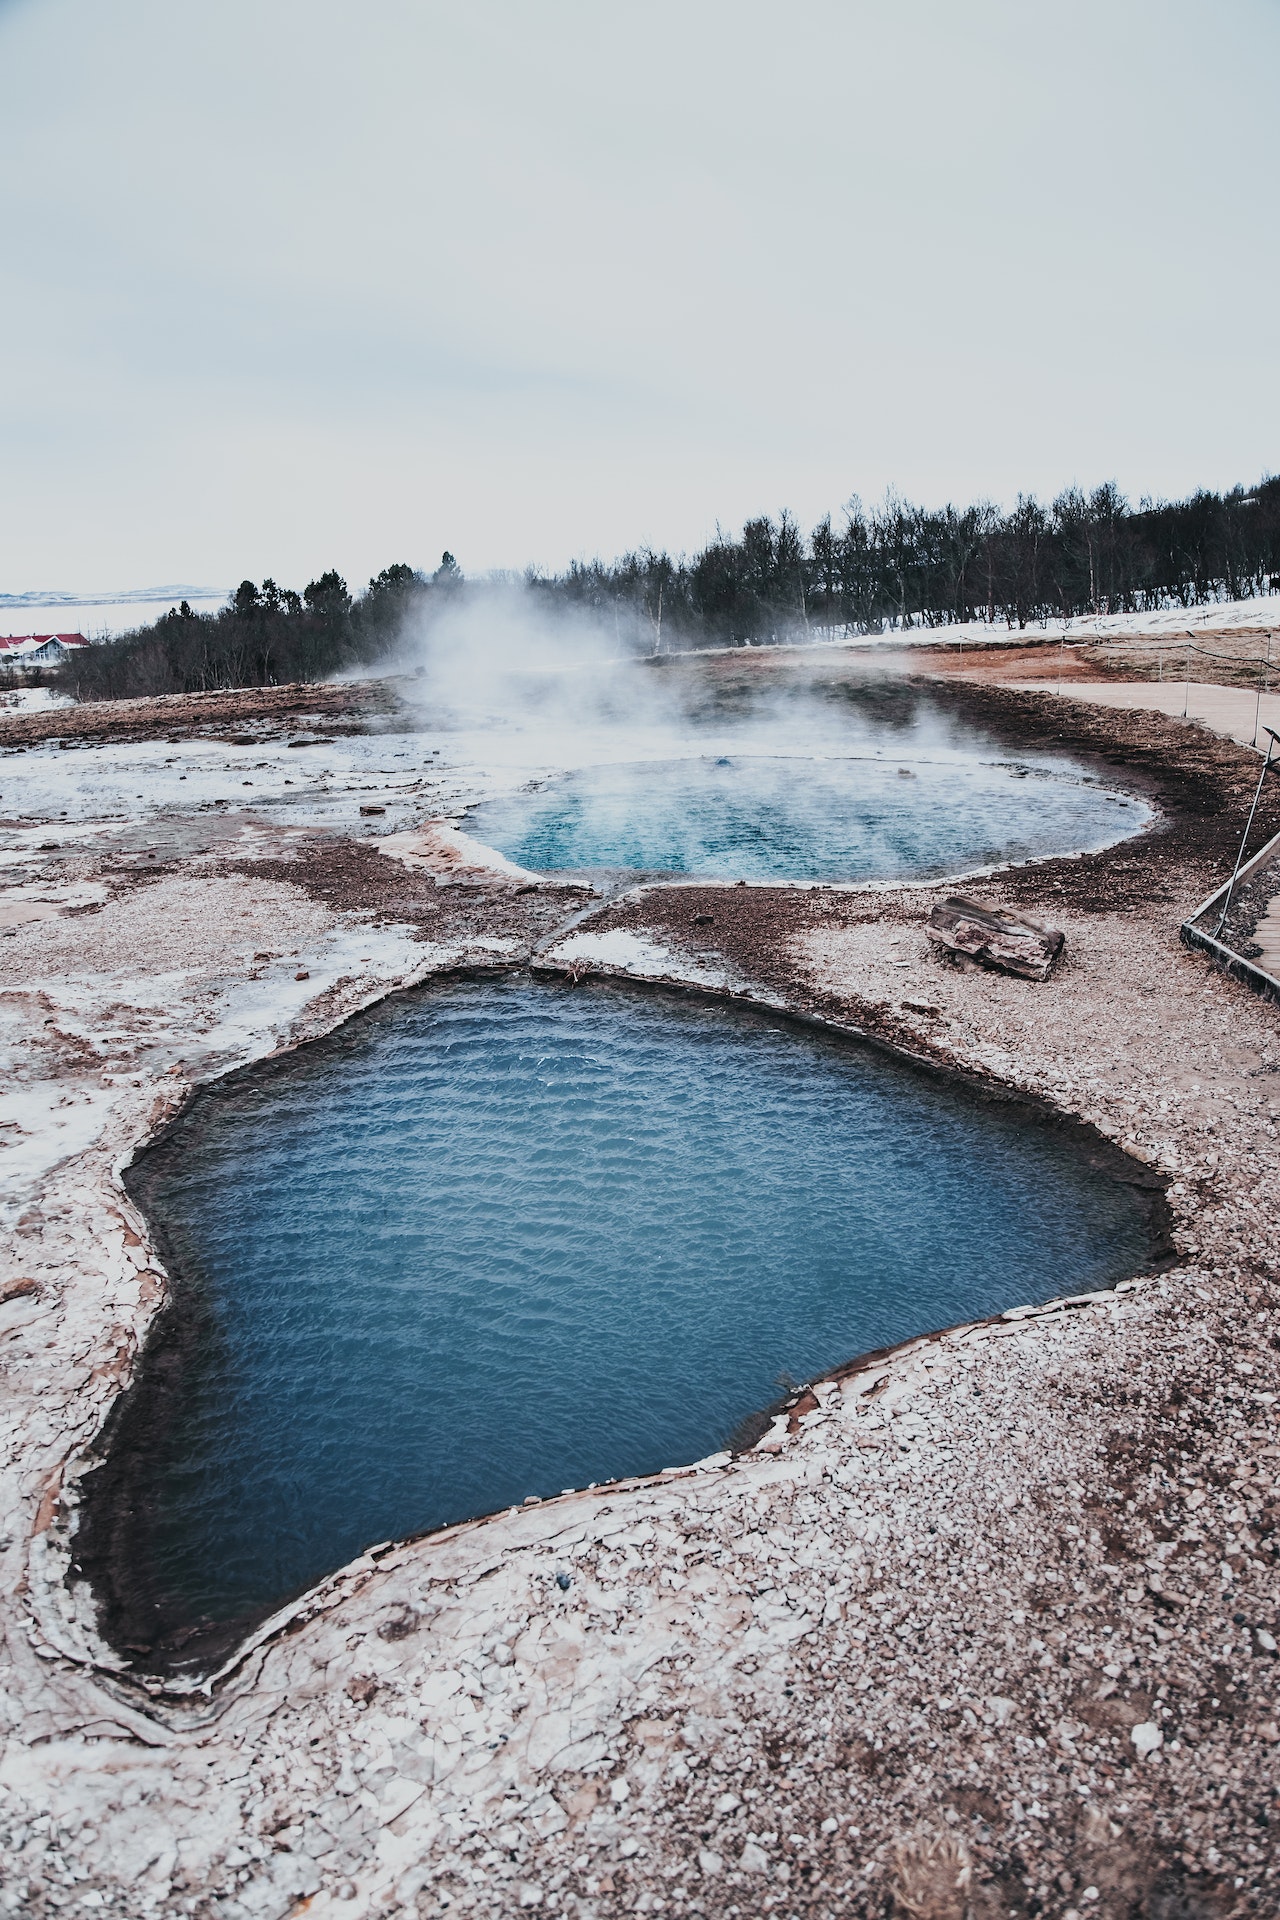 Hot Springs And Wellness In Iceland - A Perfect Destination For Wellness Seekers